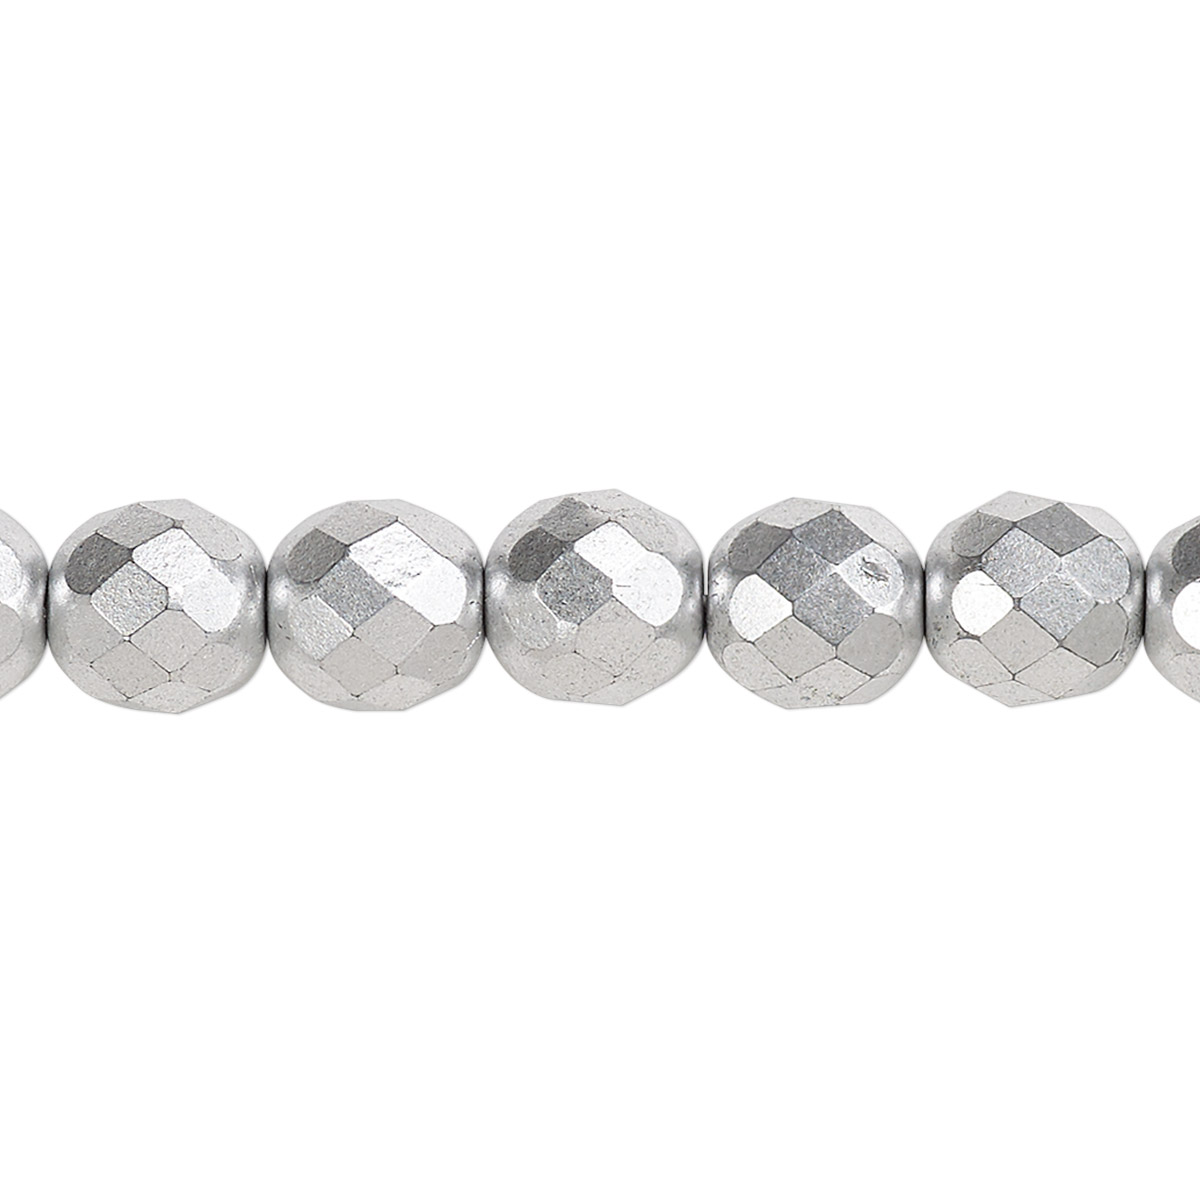 Bead, Czech fire-polished glass, opaque satin silver, 8mm faceted round ...